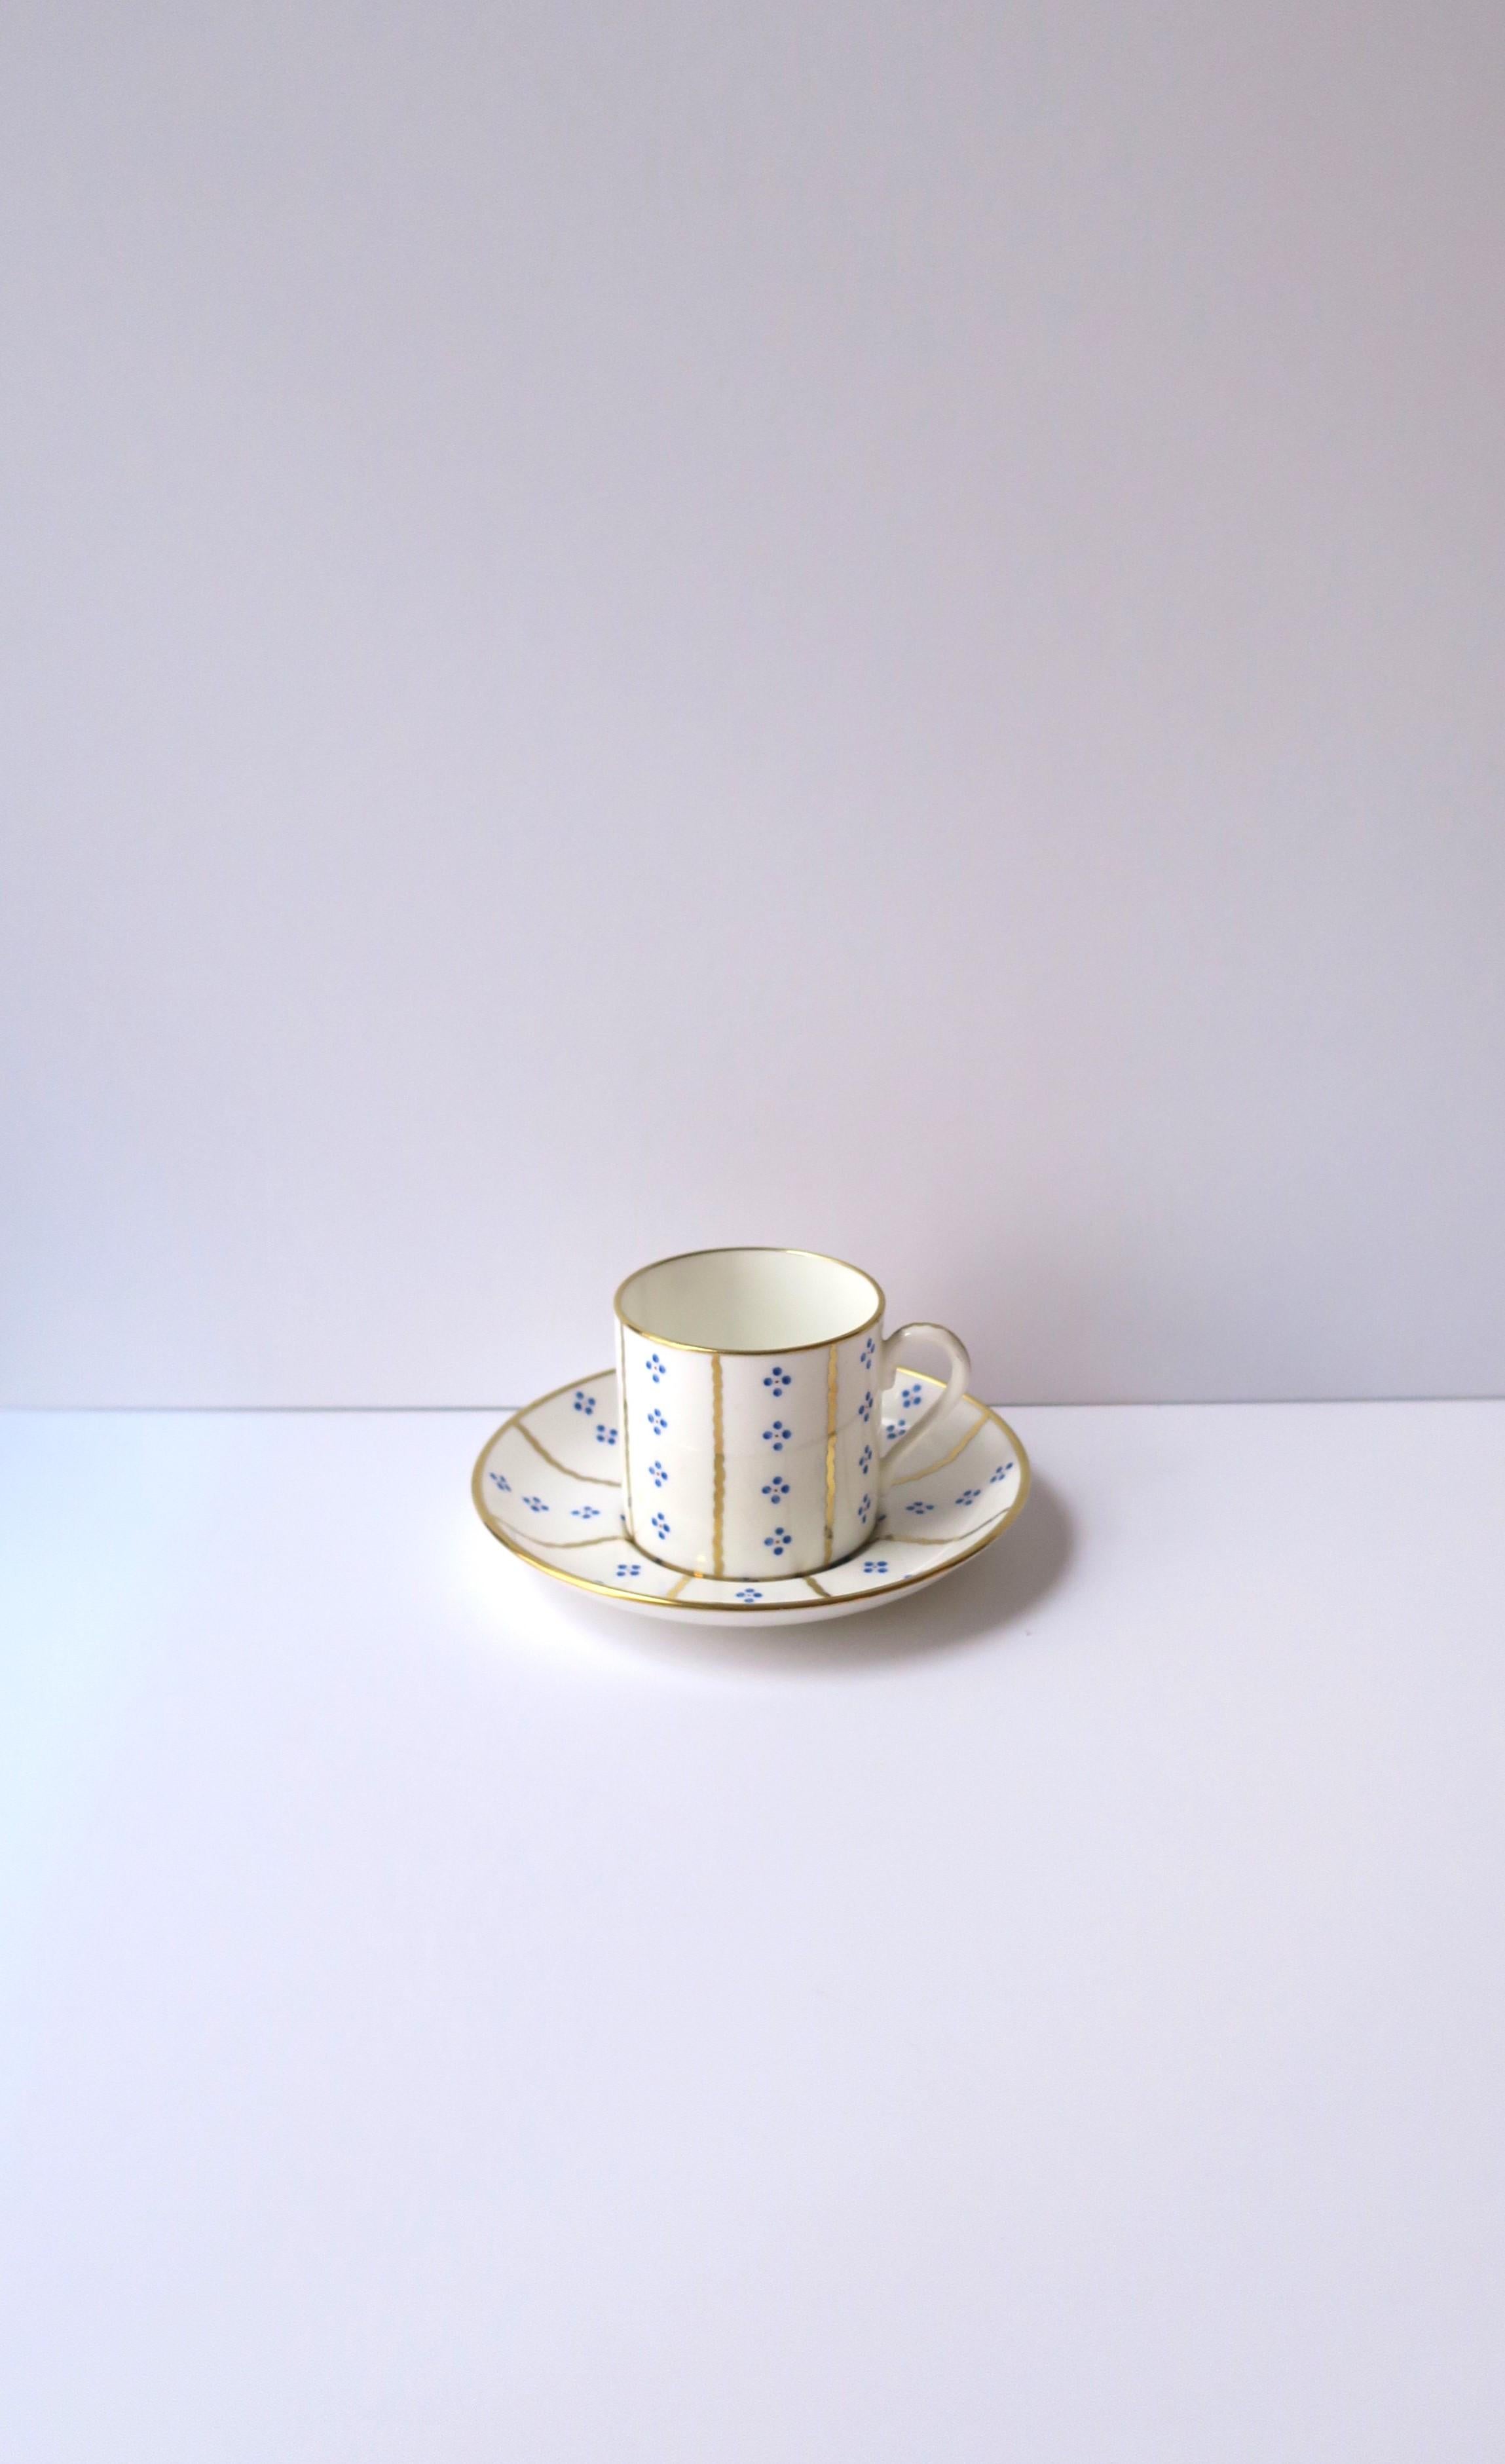 A beautiful blue and gold on white porcelain demitasse coffee espresso or tea cup and saucer set, made exclusively for luxury retailer Tiffany & Co New York, by Hammersley, circa mid-20th century, England. With markers' marks on underside of both